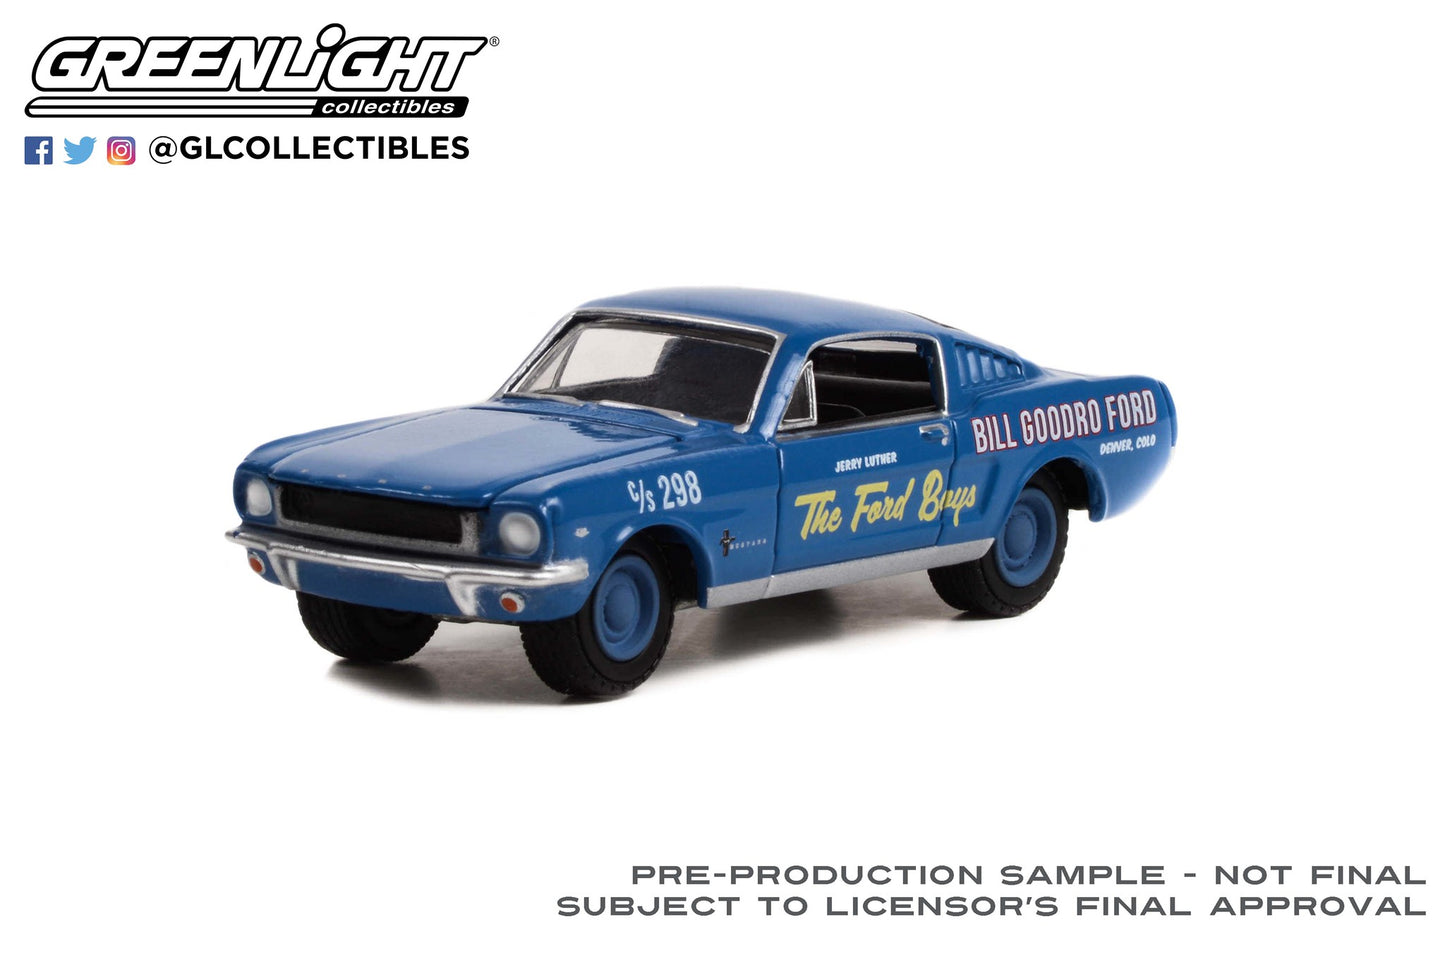 GreenLight 1:64 1965 Ford Mustang Fastback - "The Ford Boys" Bill Goodro Ford, Denver, Colorado (Hobby Exclusive) 30366